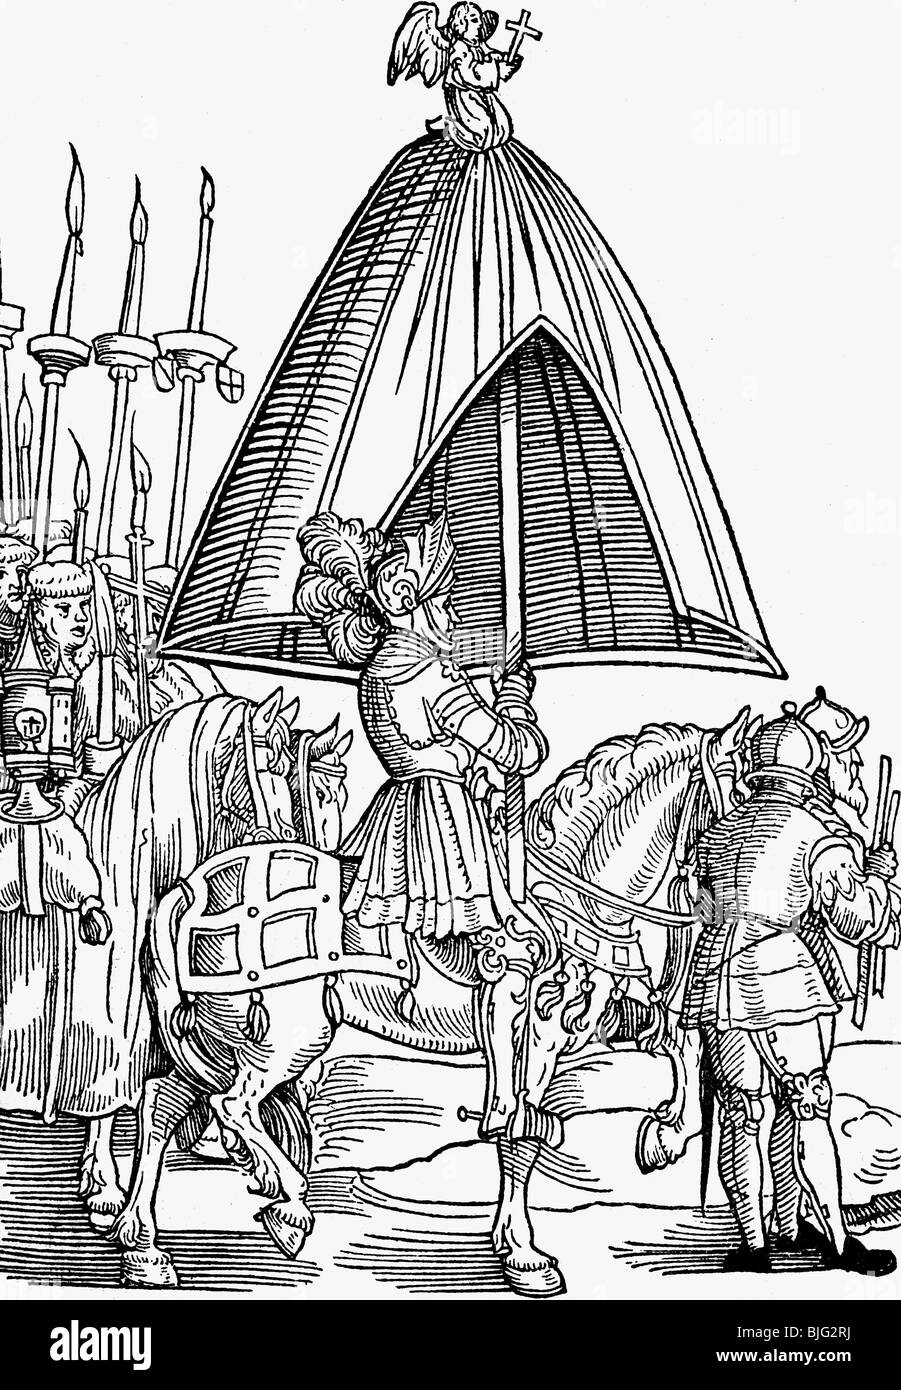 religion, christianity, councils, Council of Constance, 1414 - 1417, procession, knight with canopy, woodcut by Joerg Breu the Elder, chronicles of Ulrich von Richental, printed by Steyner, Ausgburg, 1536, middle ages, Germany, 15th century, historic, historical, Jorg, Jörg, medieval, people, Stock Photo